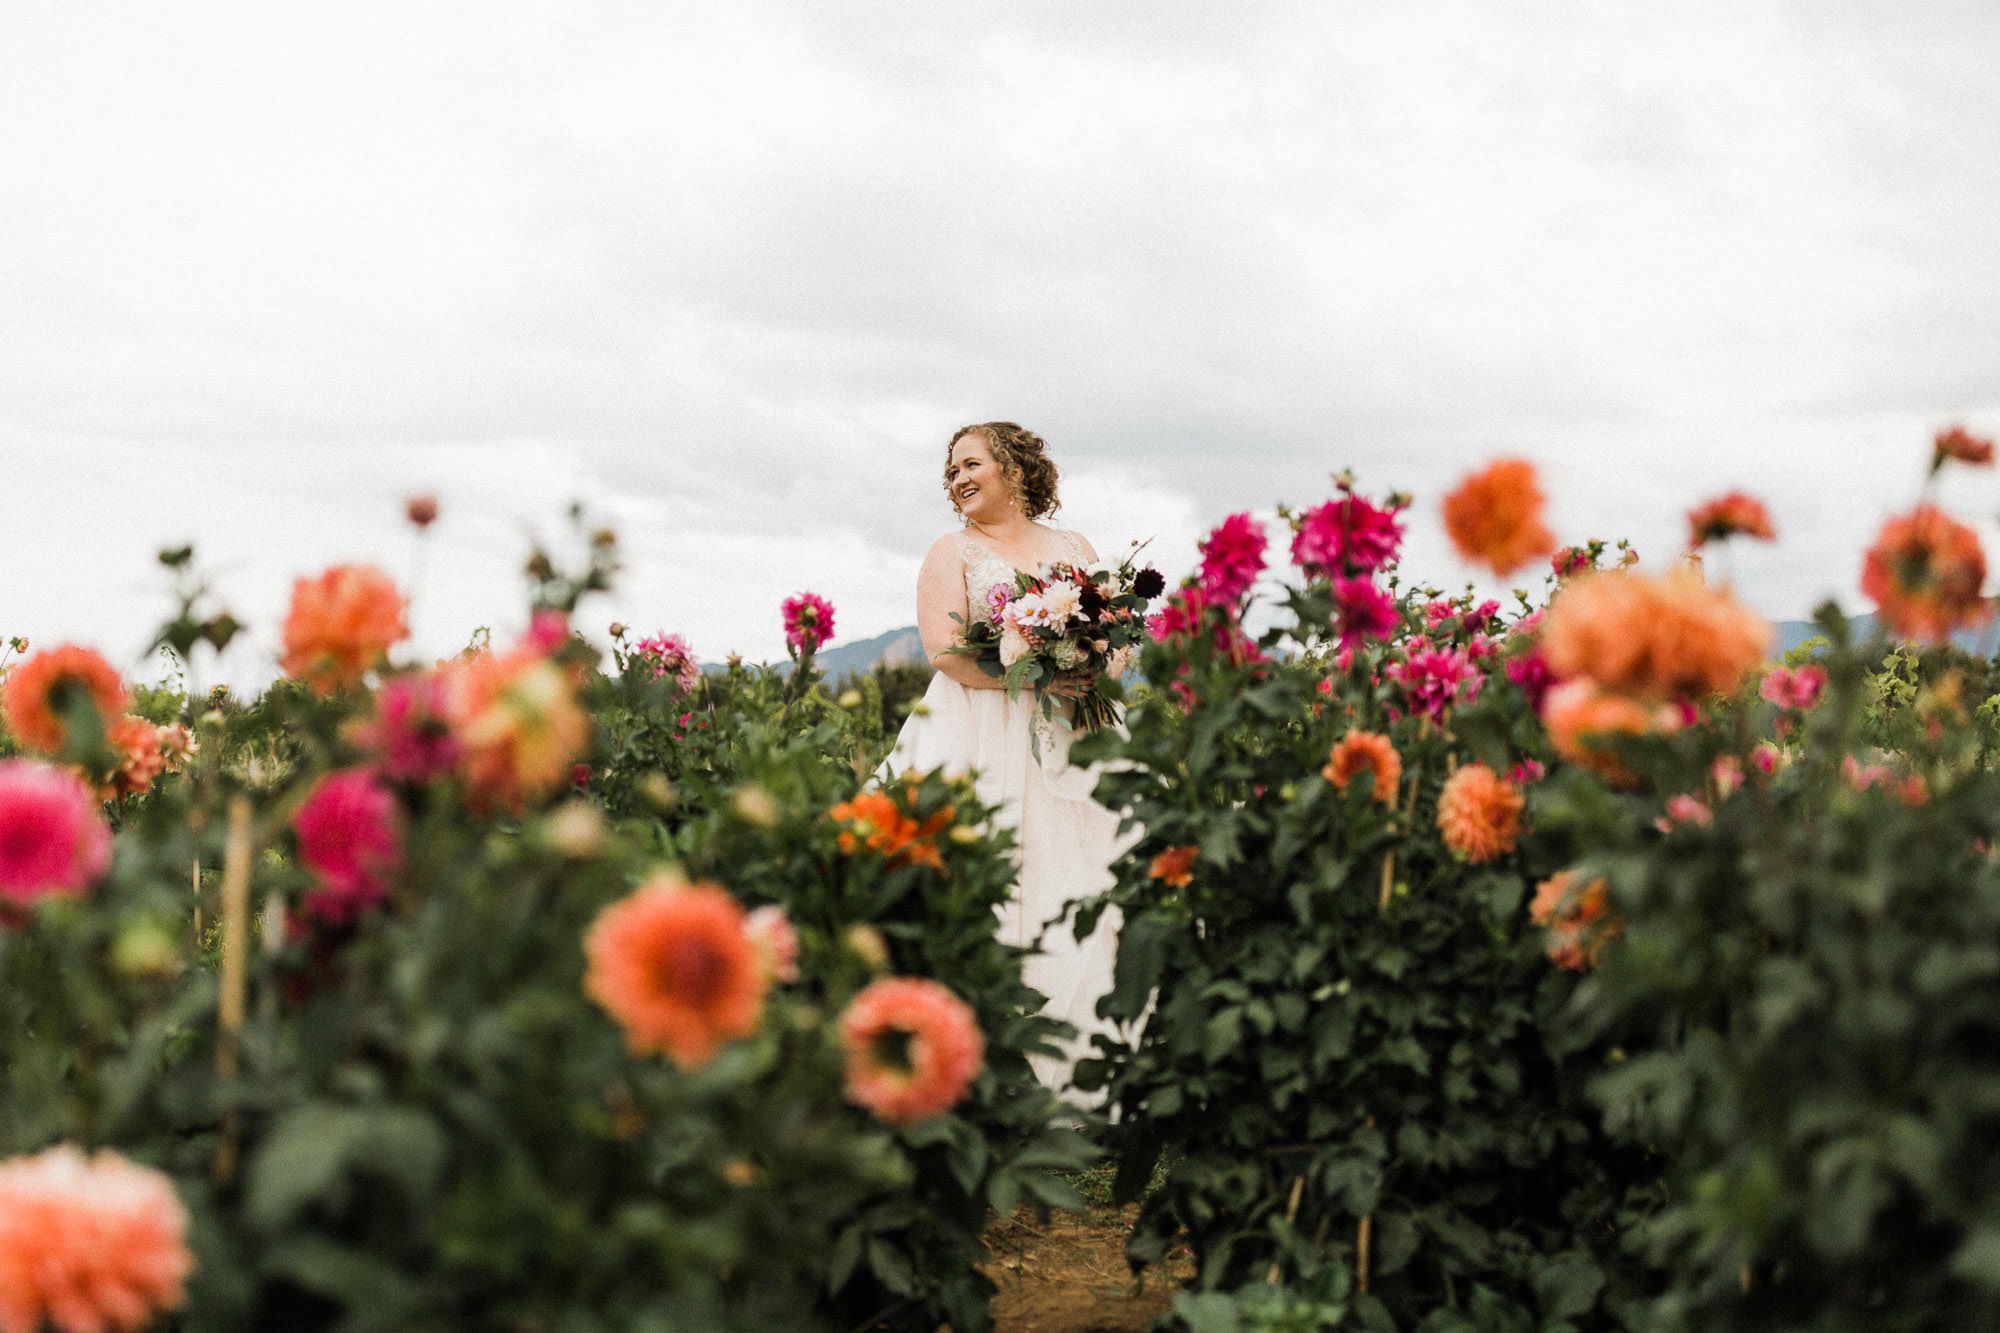 The bride poses for a portrait in a field of orange and pink dahlias in Mt. Hood, Oregon.